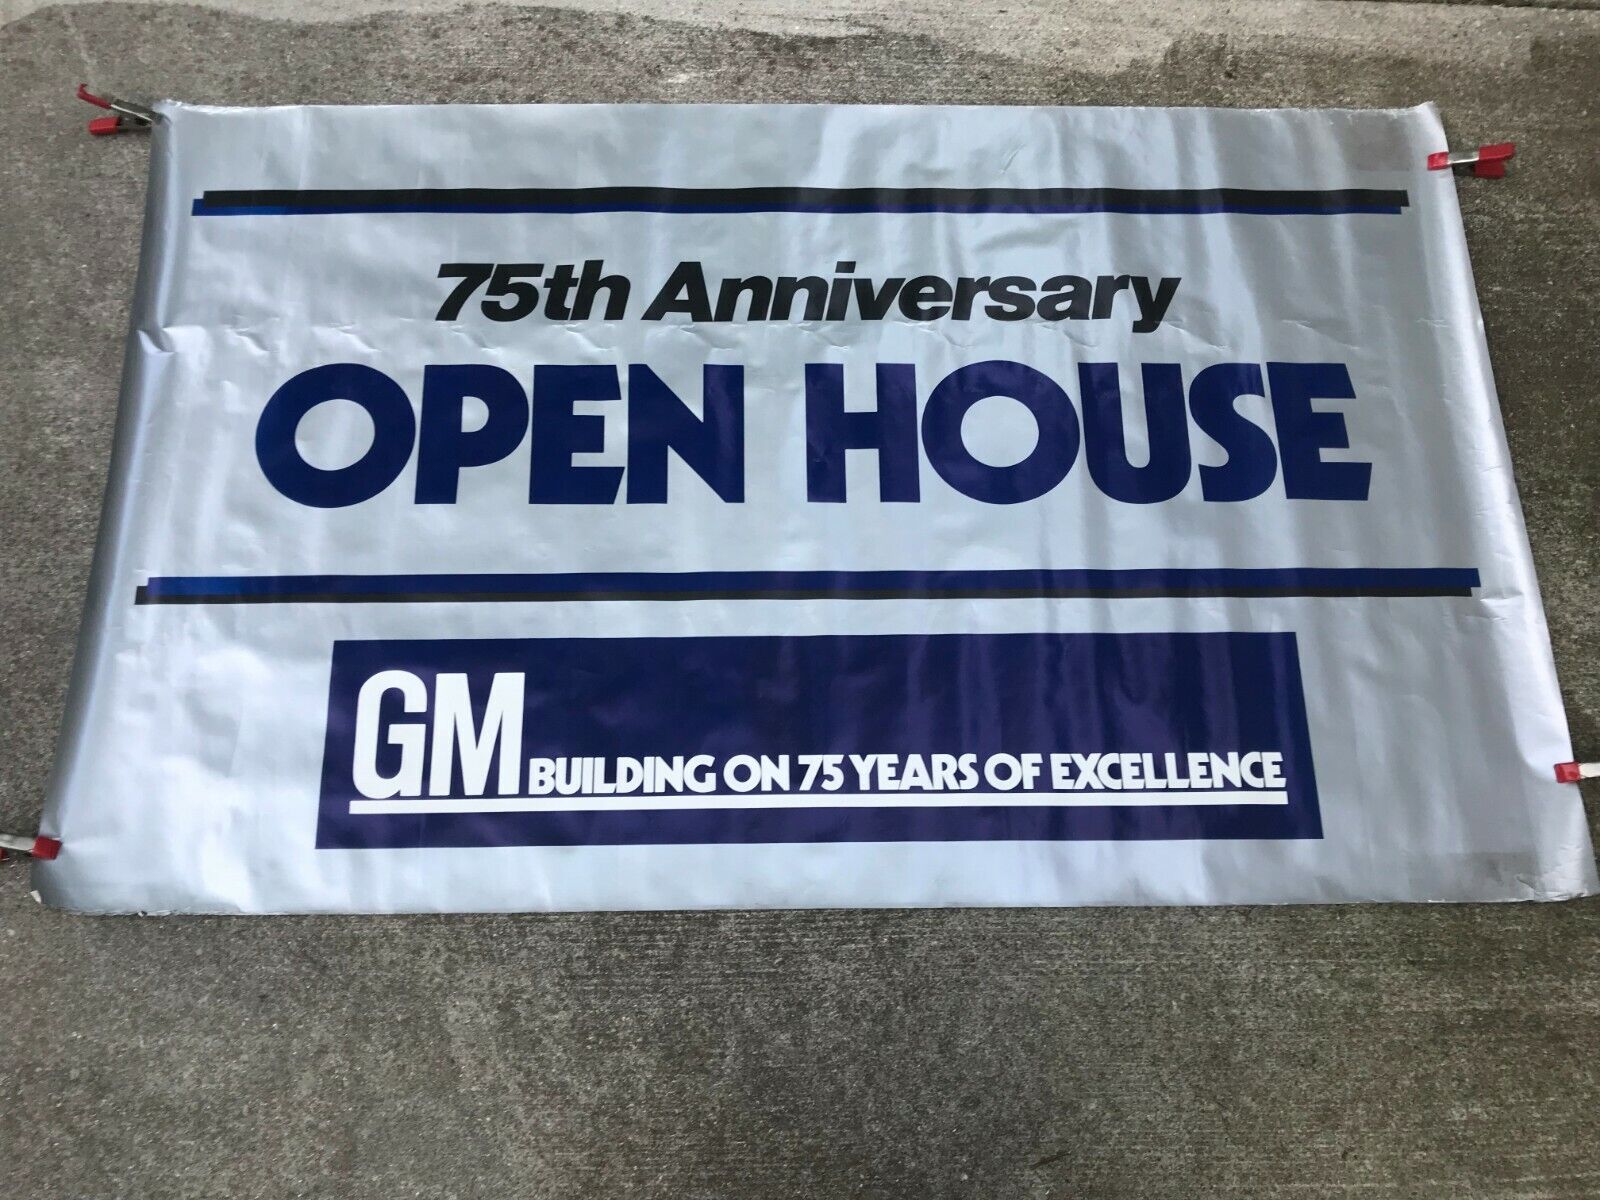 75th Anniversary Open House GM Building 75 Years of Excellence Dealership Poster